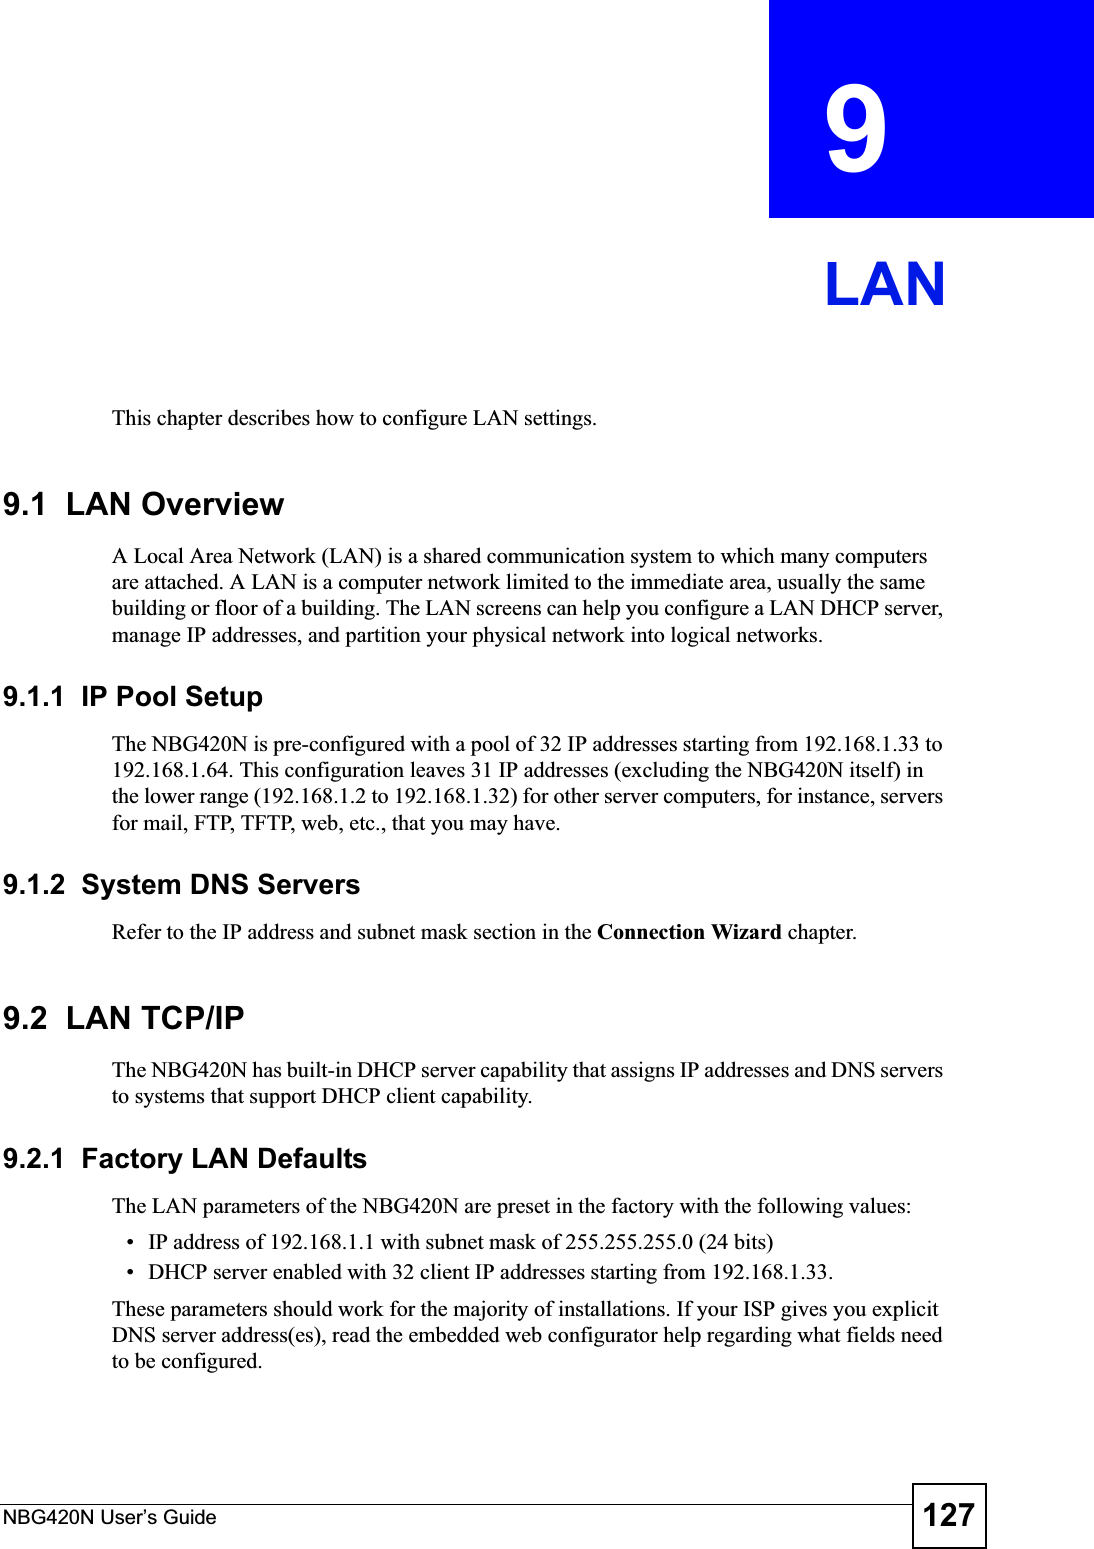 NBG420N User’s Guide 127CHAPTER  9 LANThis chapter describes how to configure LAN settings.9.1  LAN OverviewA Local Area Network (LAN) is a shared communication system to which many computers are attached. A LAN is a computer network limited to the immediate area, usually the same building or floor of a building. The LAN screens can help you configure a LAN DHCP server, manage IP addresses, and partition your physical network into logical networks.9.1.1  IP Pool SetupThe NBG420N is pre-configured with a pool of 32 IP addresses starting from 192.168.1.33 to 192.168.1.64. This configuration leaves 31 IP addresses (excluding the NBG420N itself) in the lower range (192.168.1.2 to 192.168.1.32) for other server computers, for instance, servers for mail, FTP, TFTP, web, etc., that you may have.9.1.2  System DNS ServersRefer to the IP address and subnet mask section in the Connection Wizard chapter.9.2  LAN TCP/IP The NBG420N has built-in DHCP server capability that assigns IP addresses and DNS servers to systems that support DHCP client capability.9.2.1  Factory LAN DefaultsThe LAN parameters of the NBG420N are preset in the factory with the following values:• IP address of 192.168.1.1 with subnet mask of 255.255.255.0 (24 bits)• DHCP server enabled with 32 client IP addresses starting from 192.168.1.33. These parameters should work for the majority of installations. If your ISP gives you explicit DNS server address(es), read the embedded web configurator help regarding what fields need to be configured.